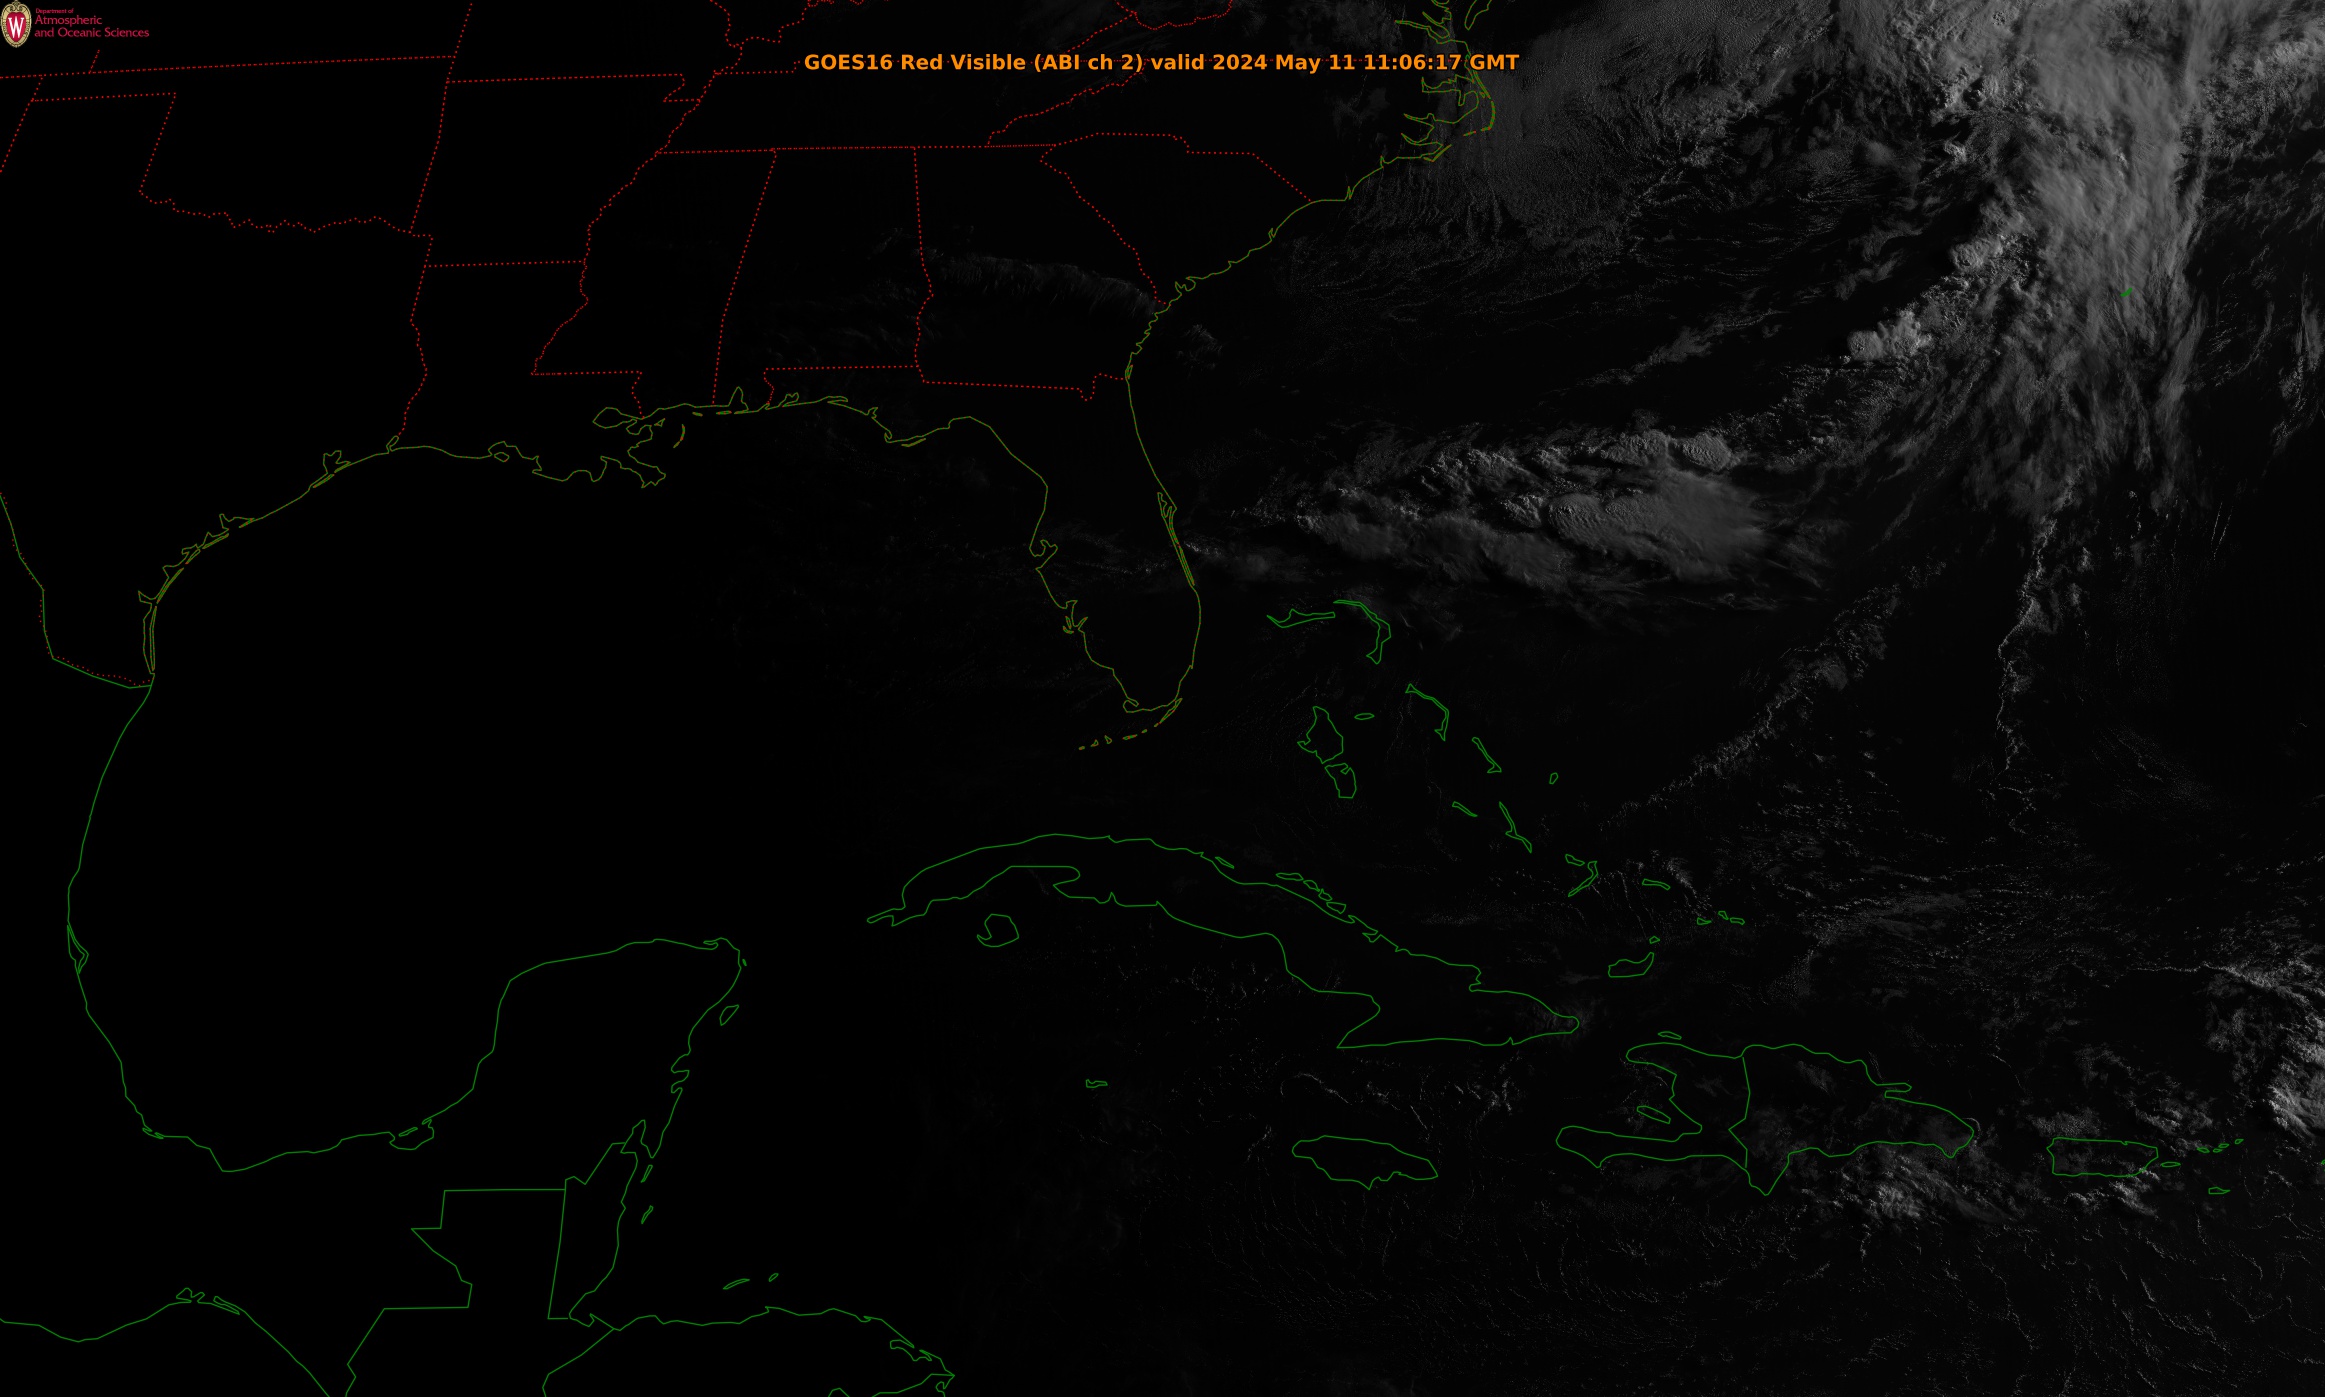 NOAA GOES Visible Image of Gulf of Mexico